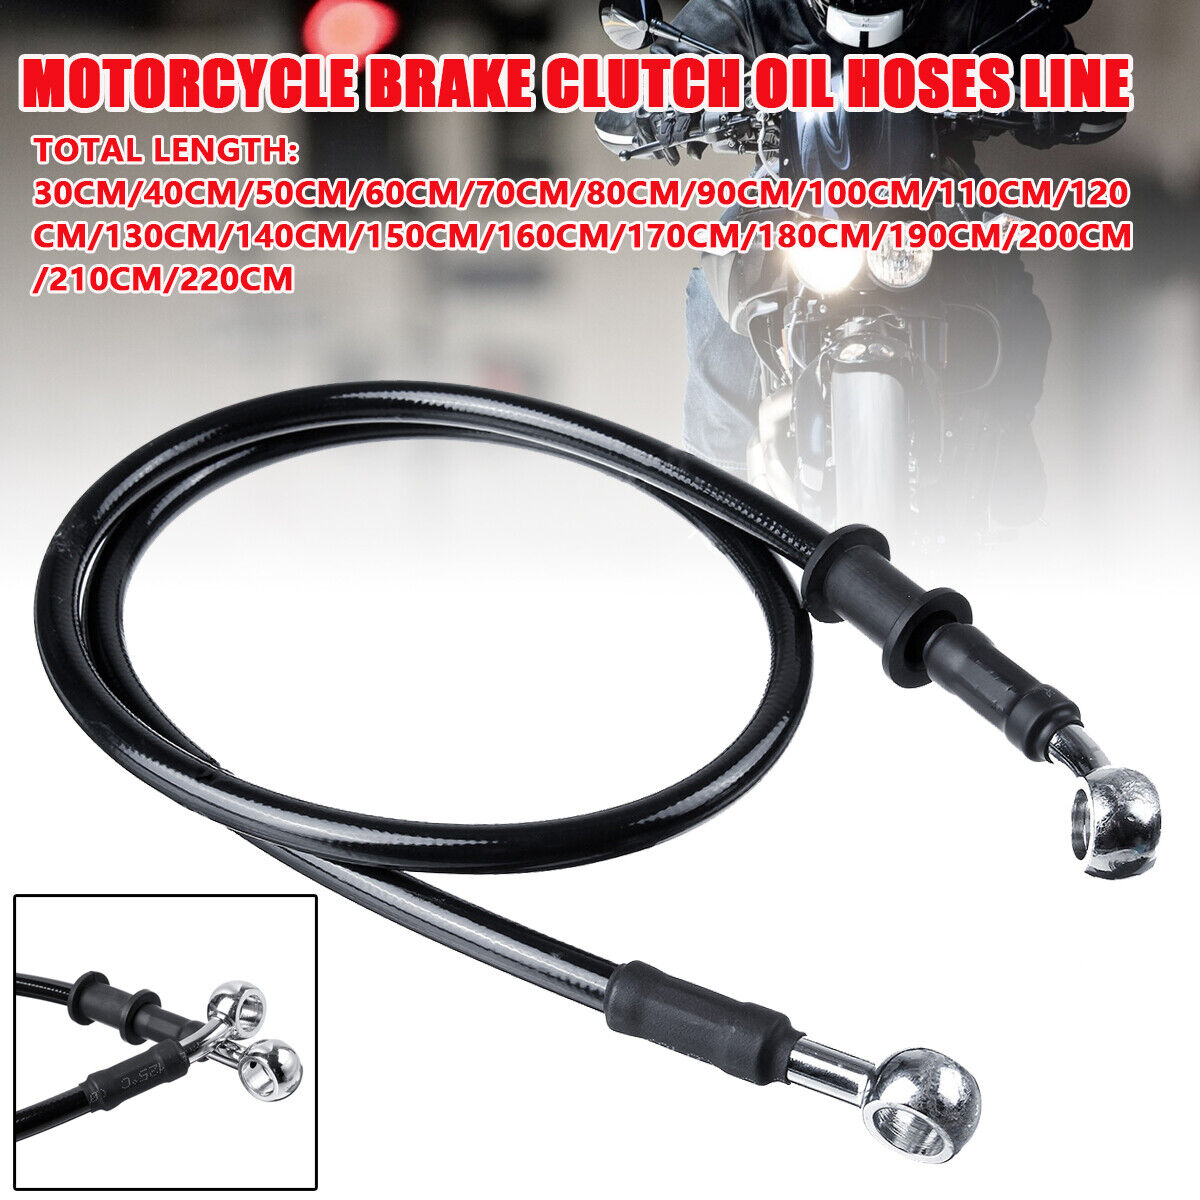 Motorcycle Braided Steel Brake Clutch Oil Hose Line Pipe Cable 30cm-220cm